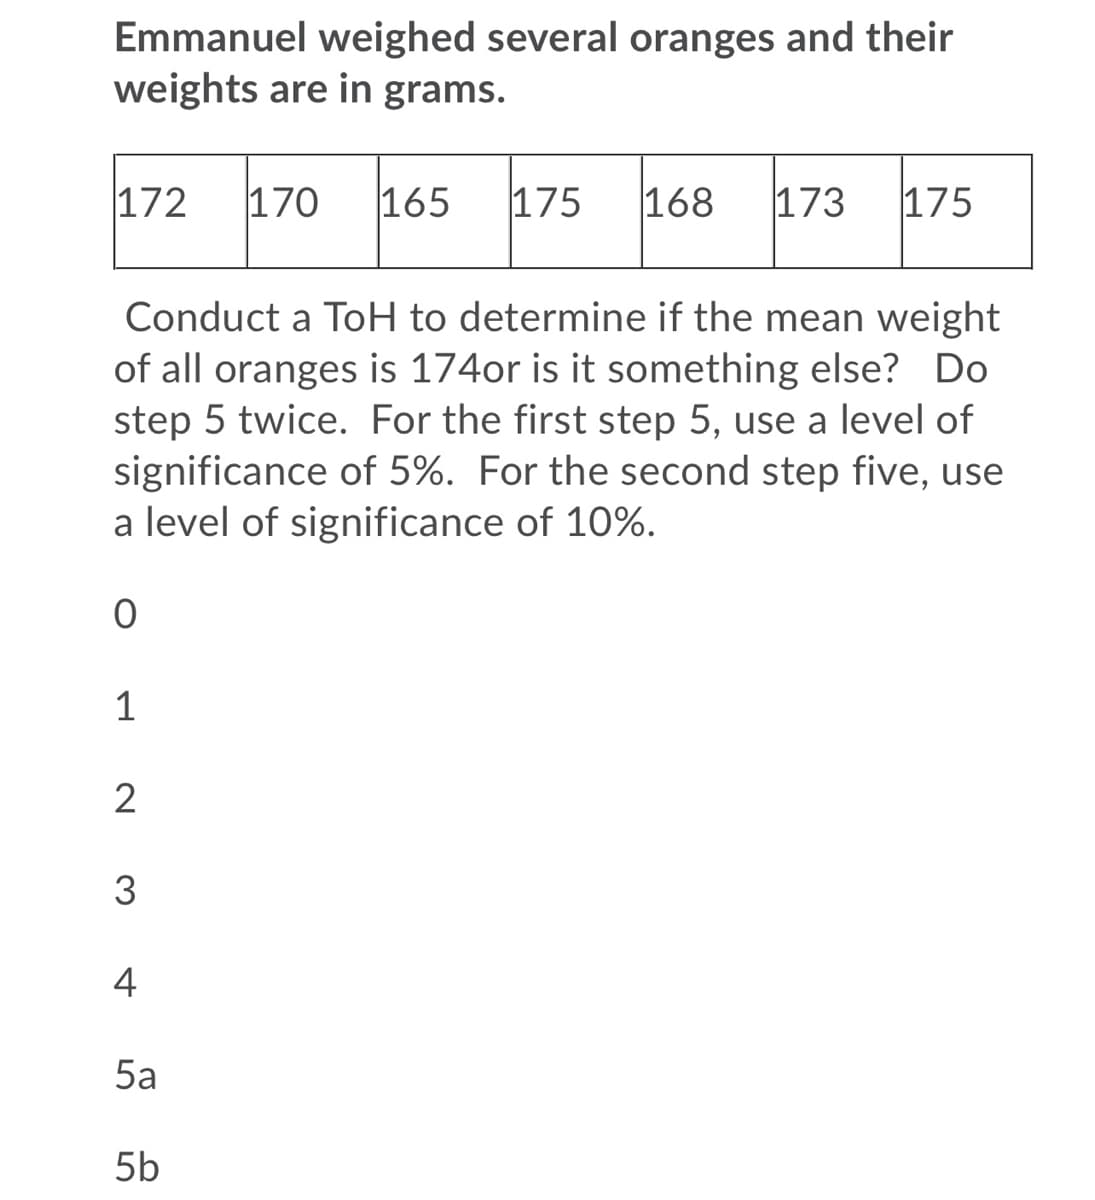 Emmanuel weighed several oranges and their
weights are in grams.
172
170
165
175
168
173
175
Conduct a ToH to determine if the mean weight
of all oranges is 174or is it something else? Do
step 5 twice. For the first step 5, use a level of
significance of 5%. For the second step five, use
a level of significance of 10%.
1
2
3
4
5a
5b
